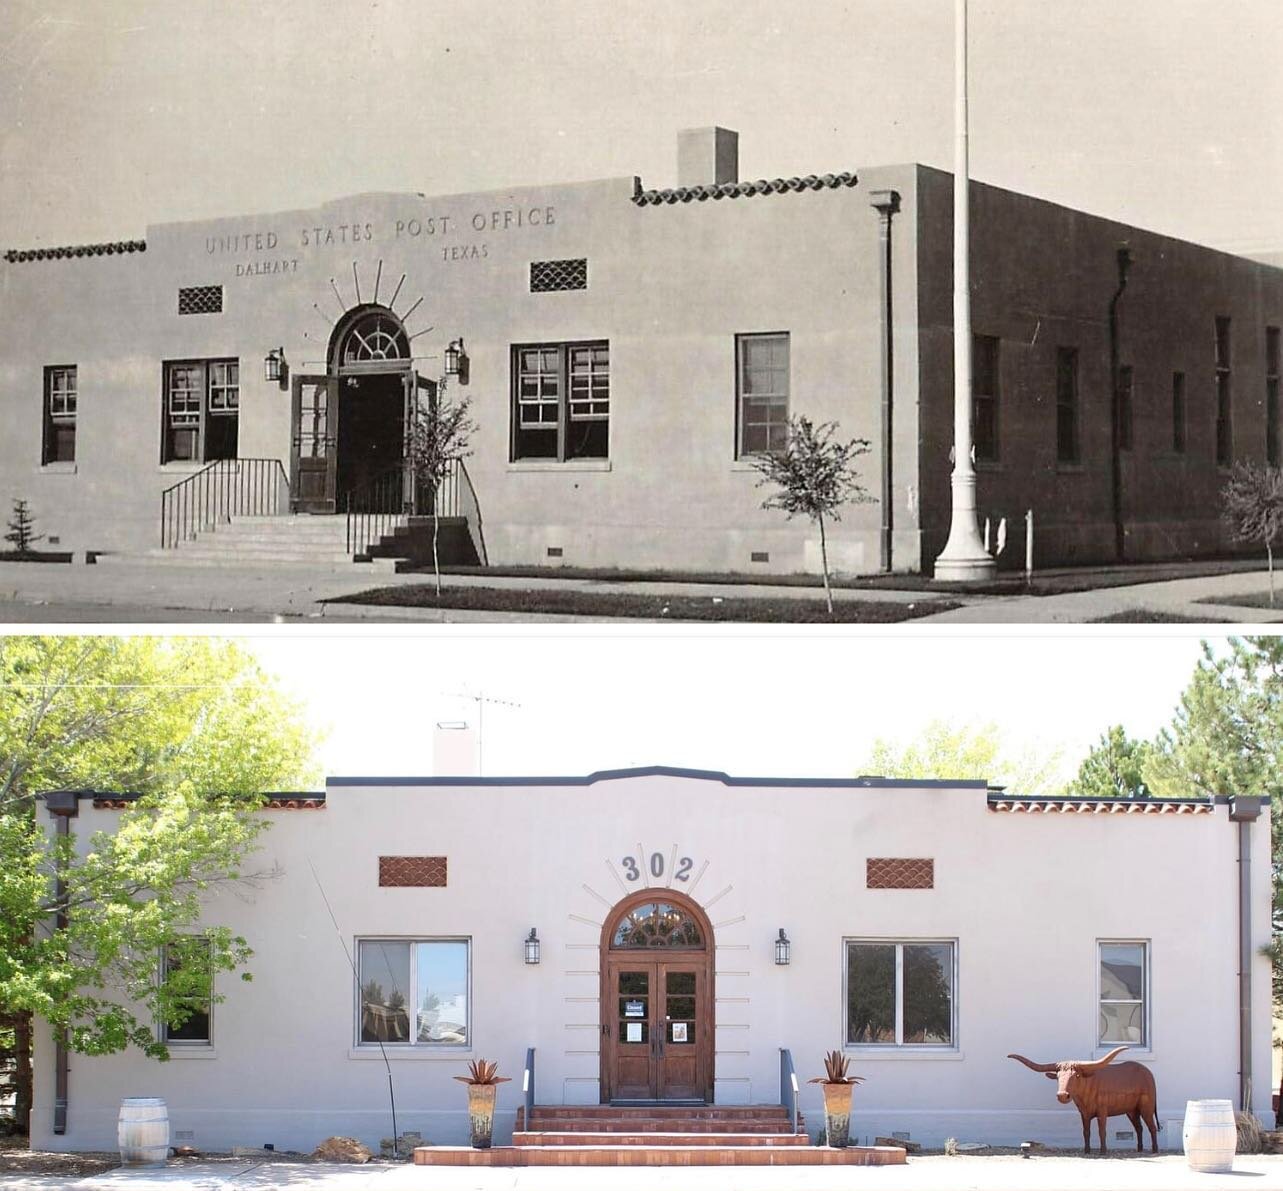 The City of Dalhart posted about our historic building&hellip;.

May is National Historic Preservation Month! Dalhart features several beautifully preserved and restored historic buildings, some dating back over a century. Today we want to highlight 